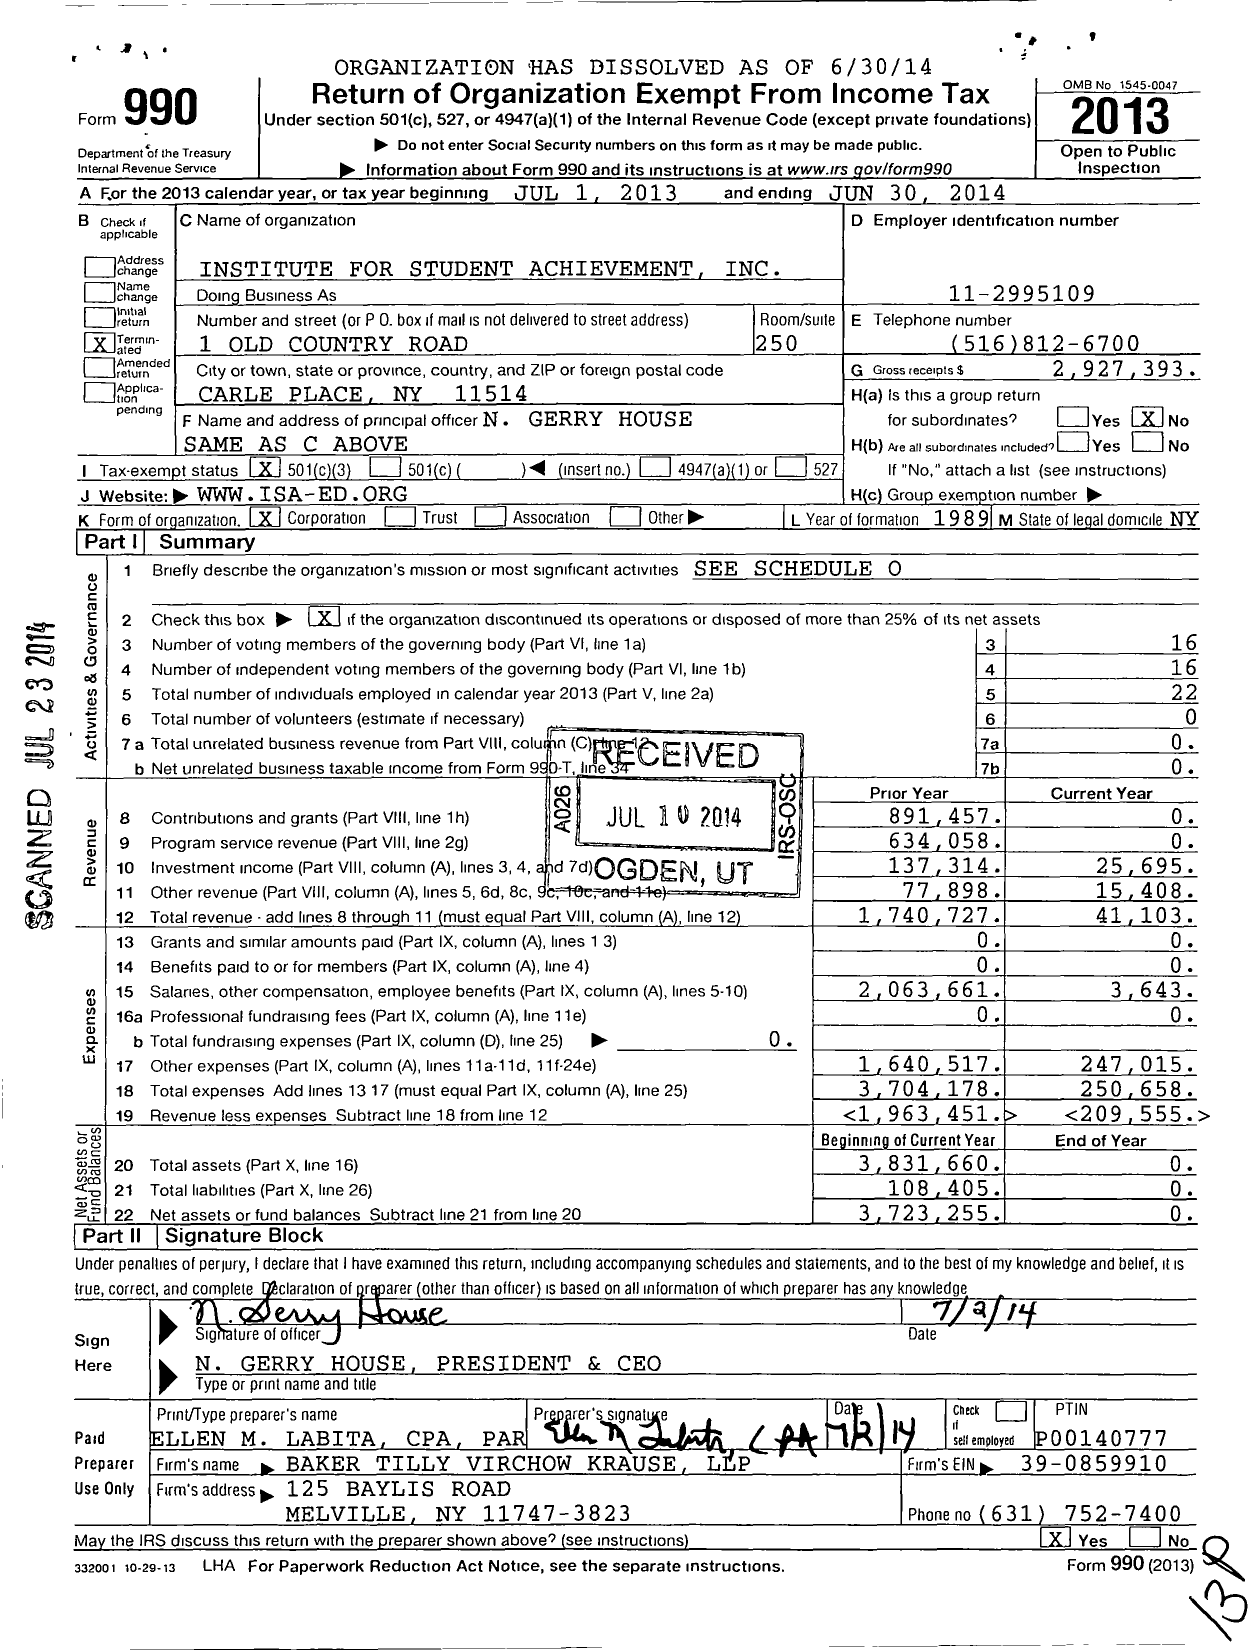 Image of first page of 2013 Form 990 for Institute for Student Achievement (ISA)